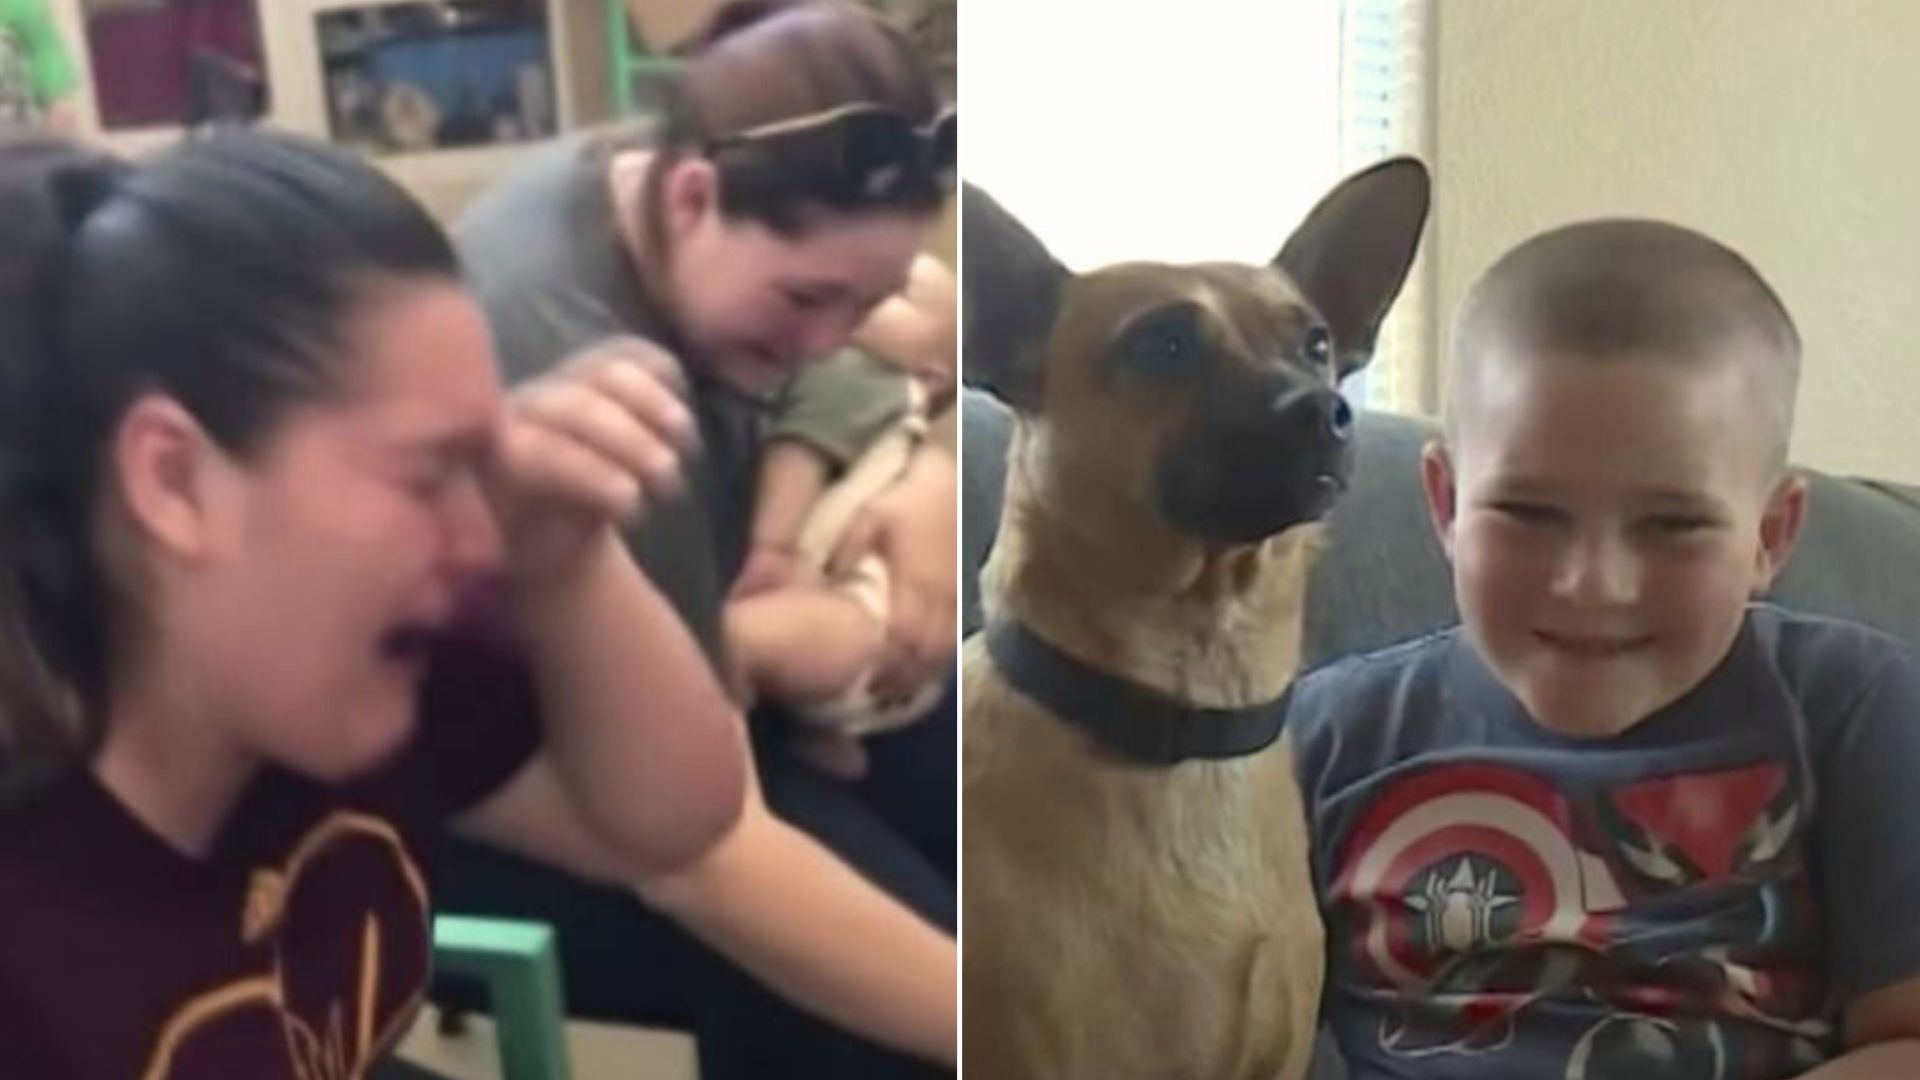 Kids Volunteering At Shelter Reunite With Their Missing Dog After 2 Long Years